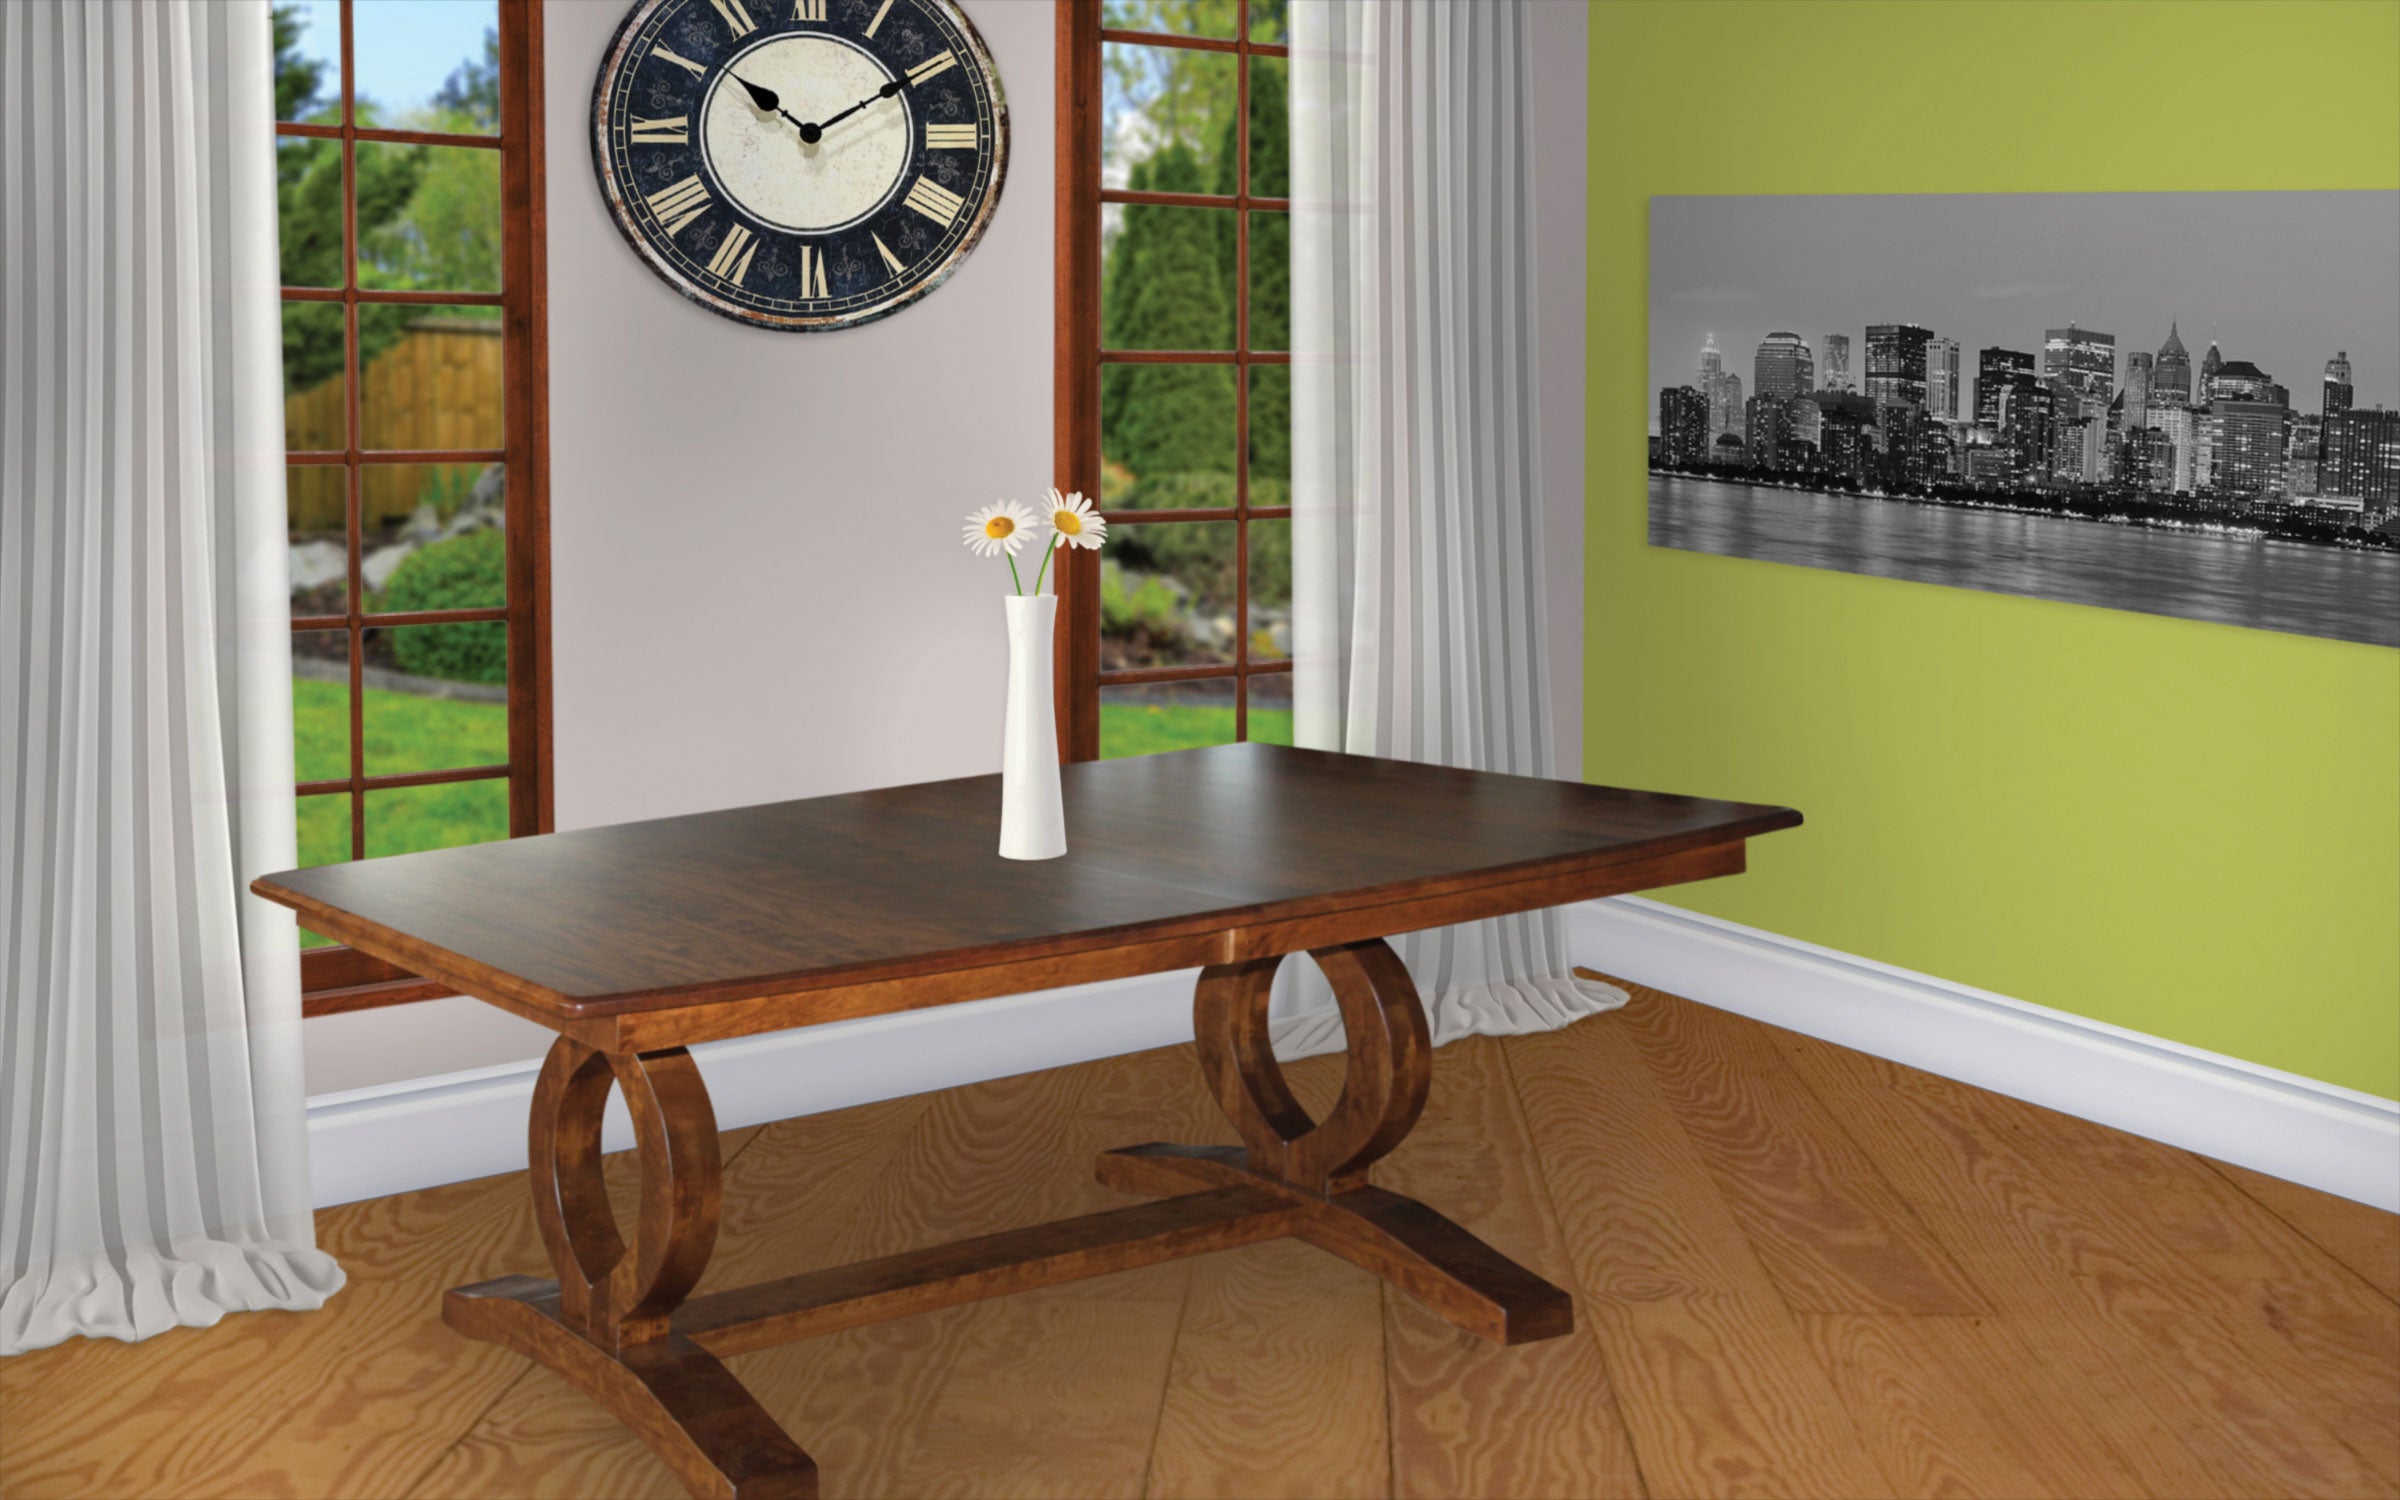 master double pedestal table in room setting